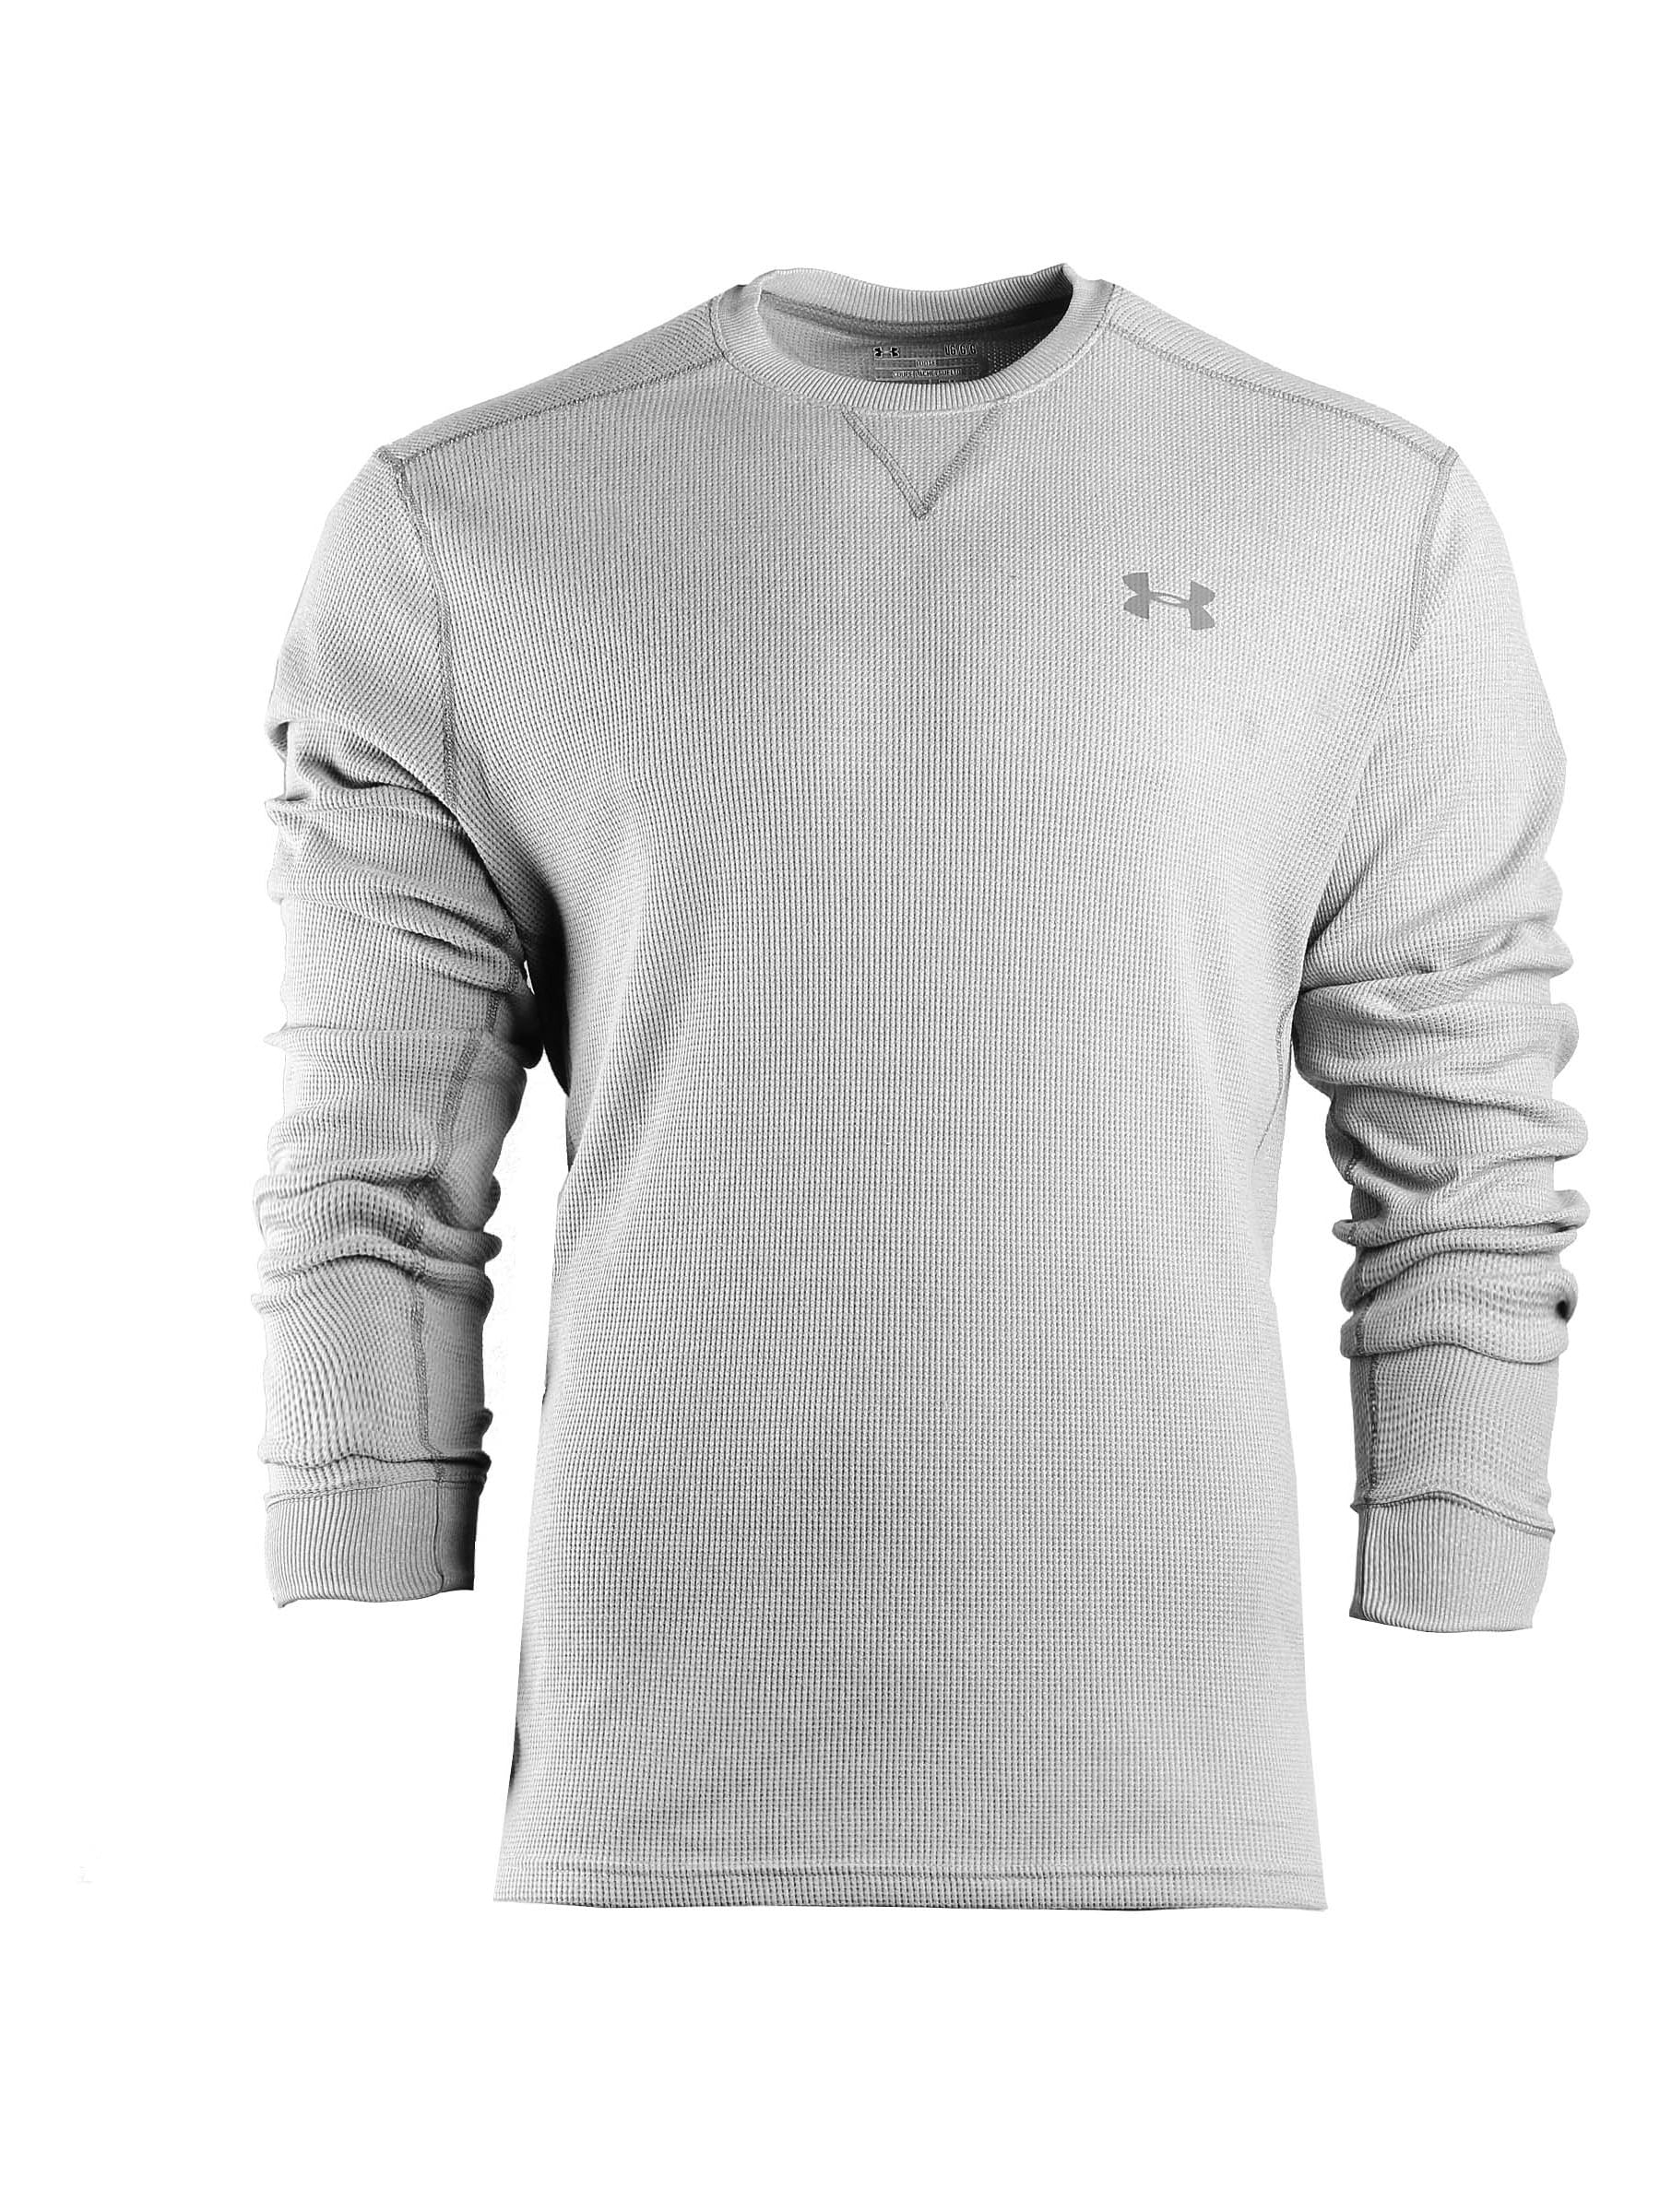 Grey New Under Armour UA Men's Pursuit Stealth Thermal Top 